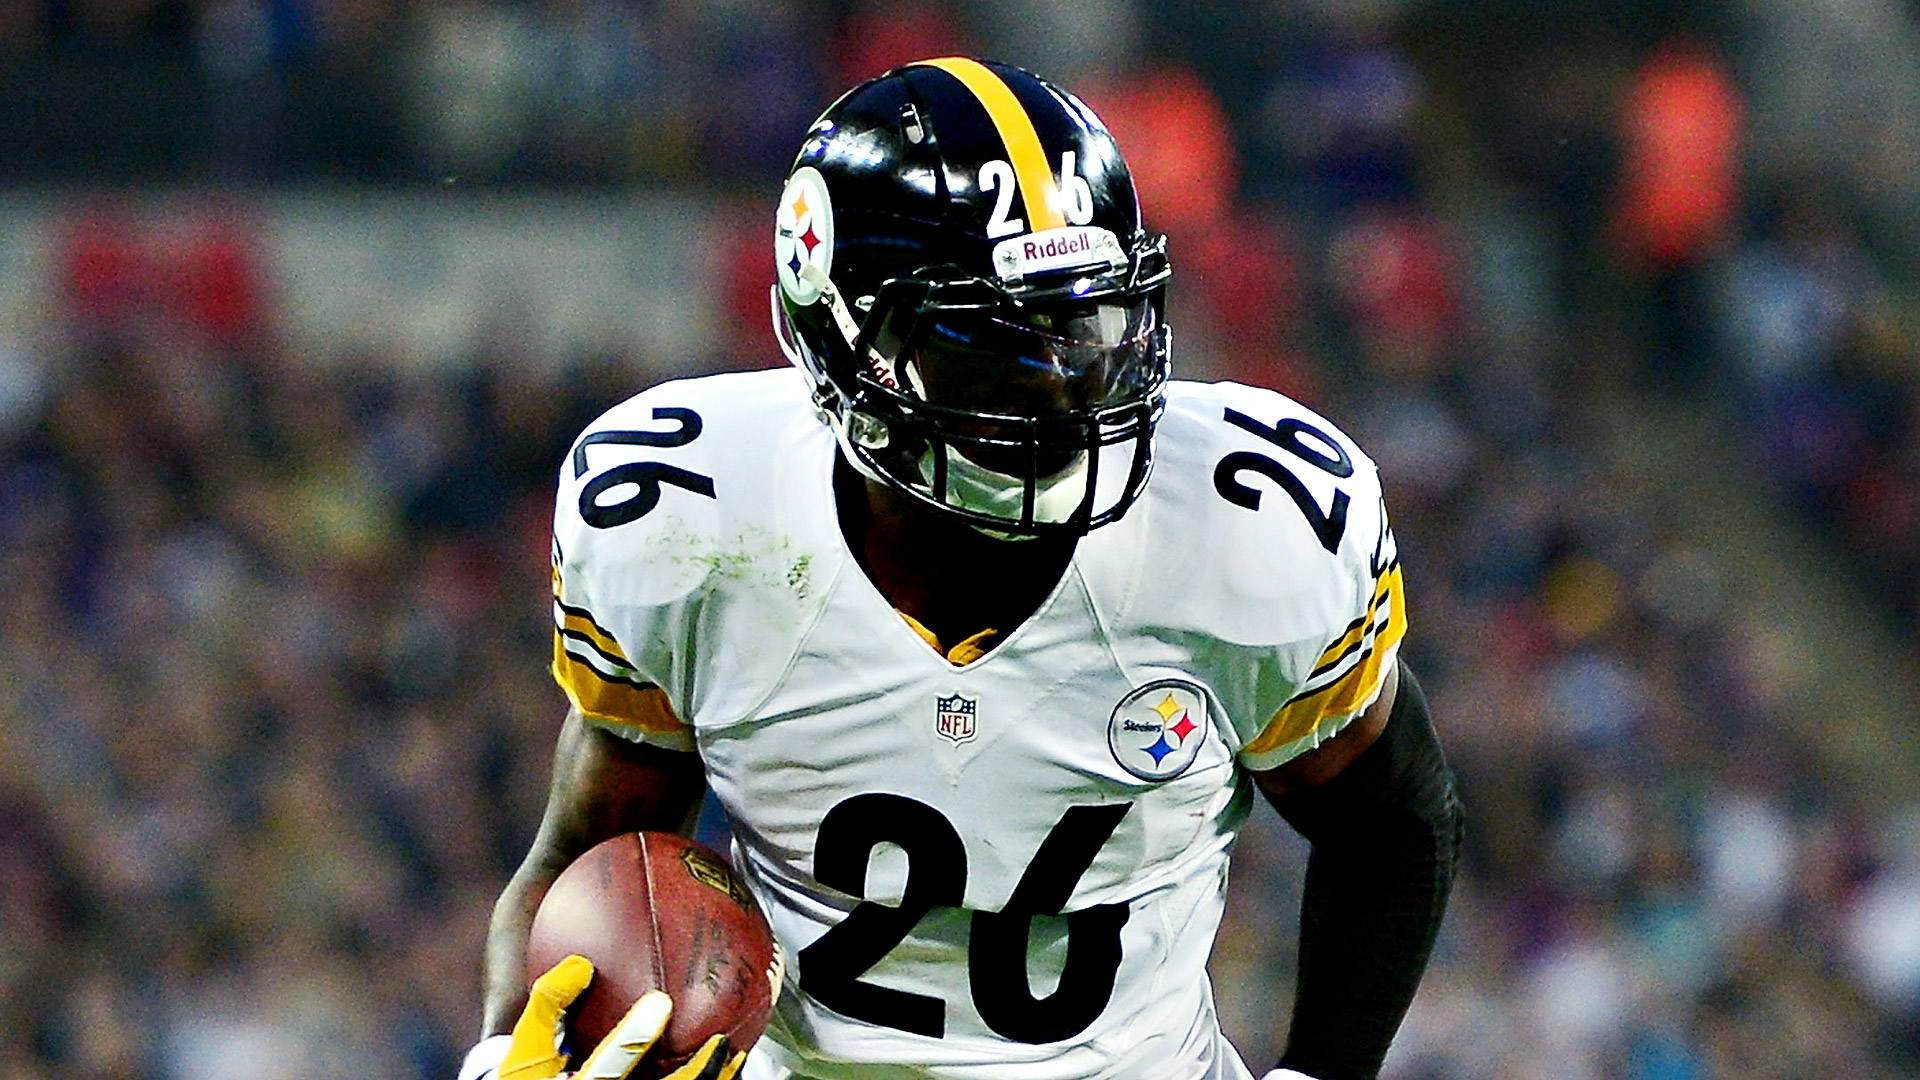 Steelers Rb Le Veon Bell And Legarrette Blount Arrested For Marijua